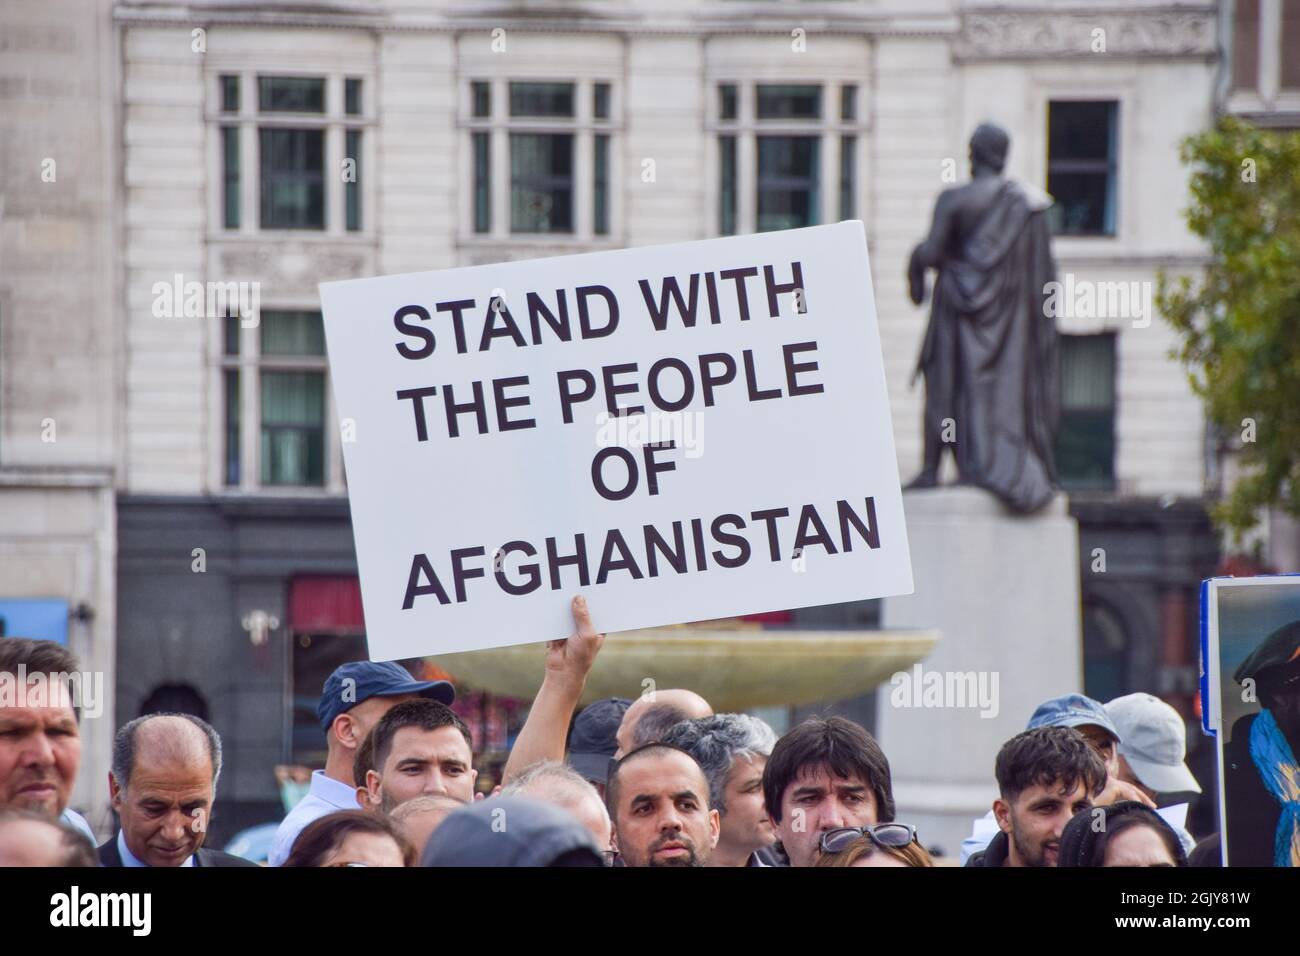 London, United Kingdom. 12th September 2021. Demonstrators gathered in Trafalgar Square on the 20th anniversary of the assassination of opposition commander Ahmad Shah Massoud, in protest against the Taliban takeover and to call on the UK and the international community to help Afghanistan. Credit: Vuk Valcic / Alamy Live News Stock Photo